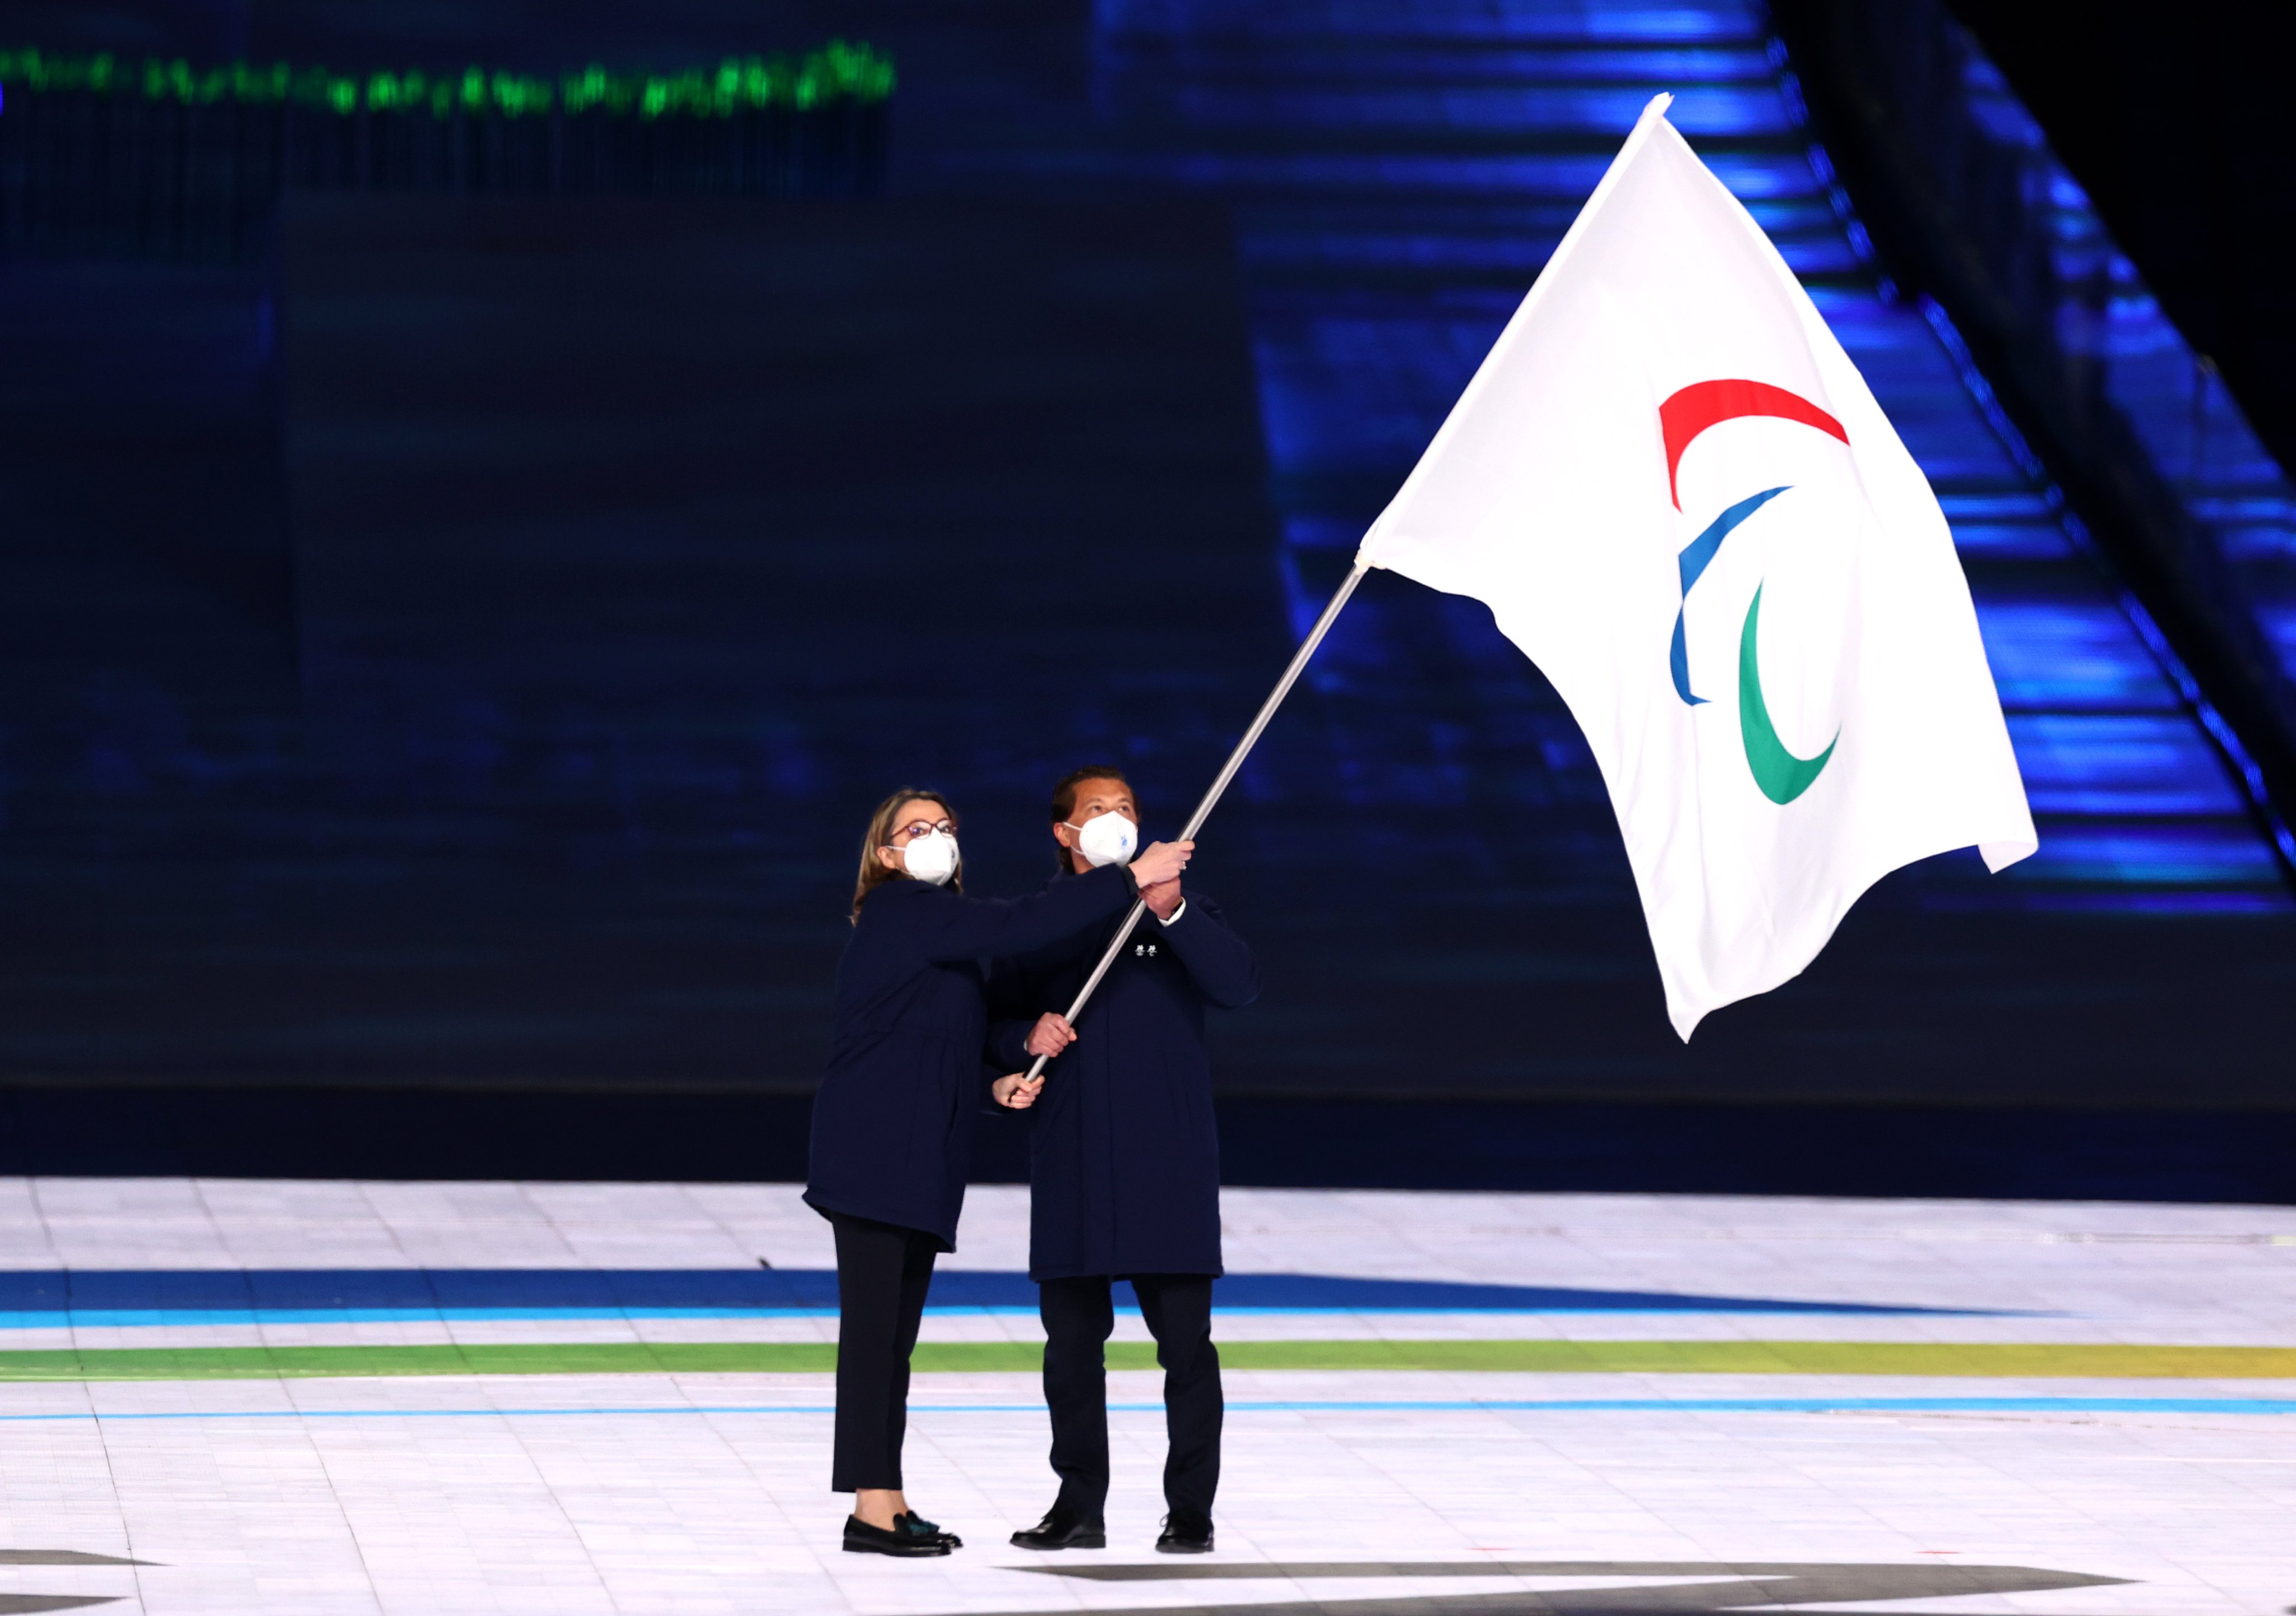 The Paralympic flag is handed over to Milan, the next hosts of the games during the Closing Ceremony